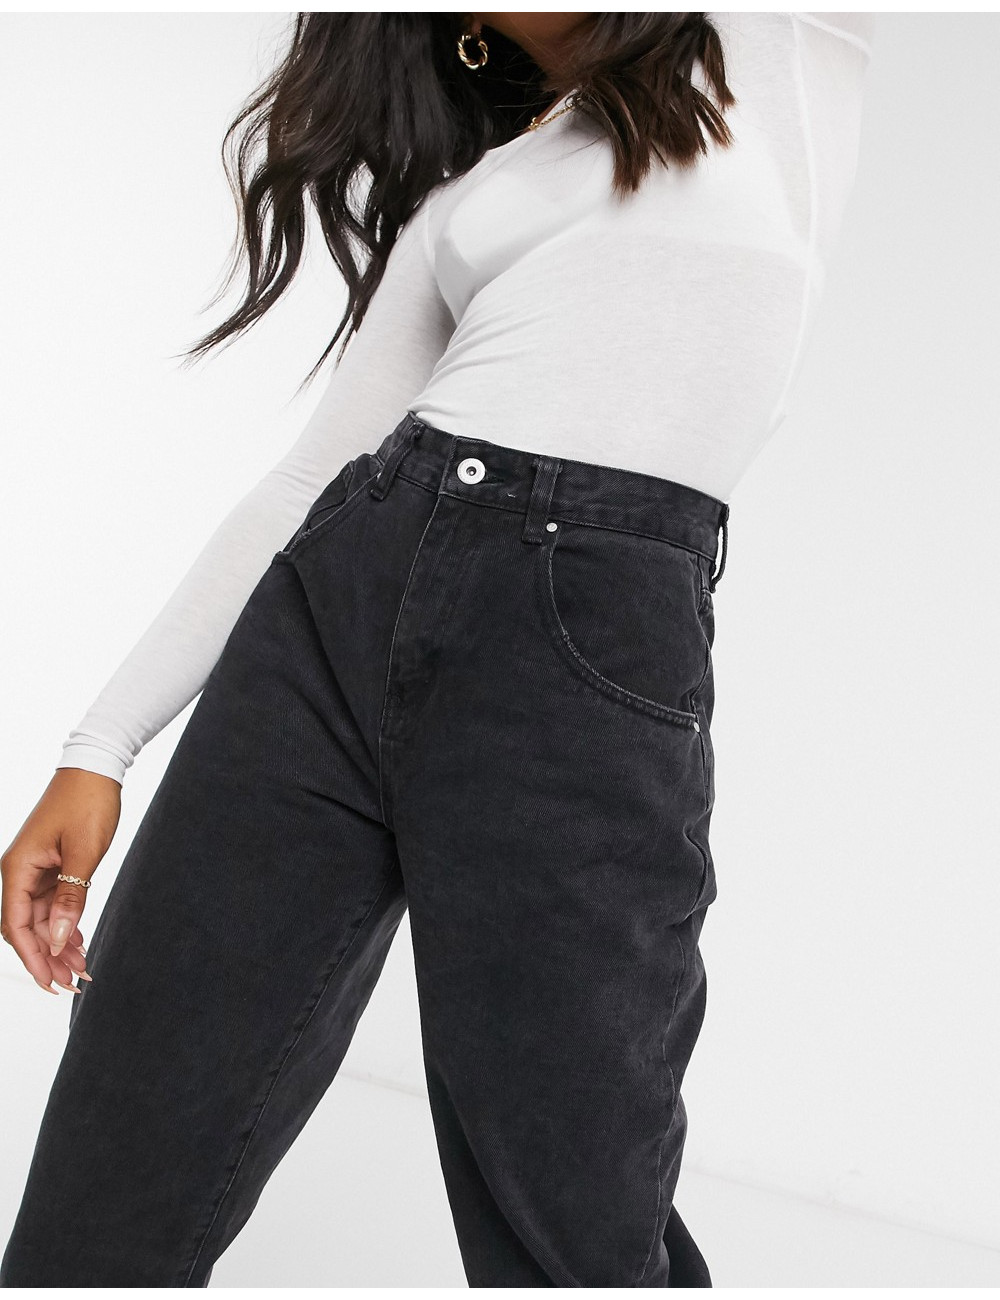 Cotton:On slouch mom jean...